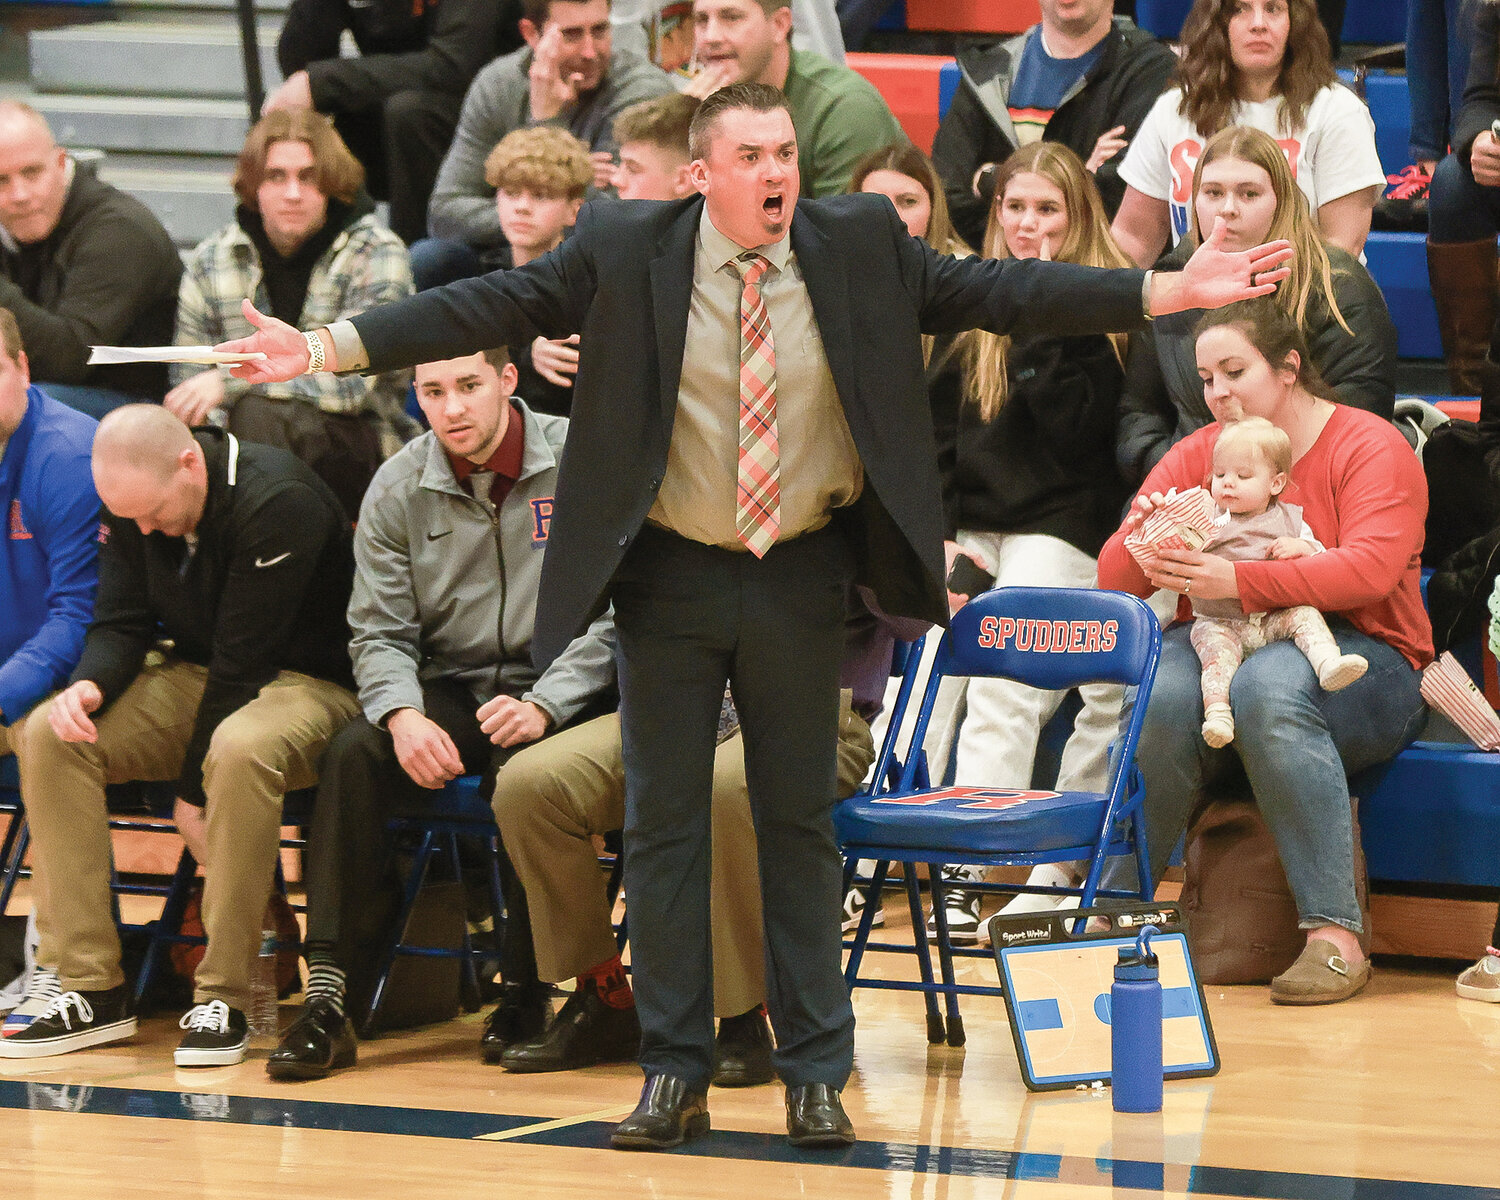 Ridgefield Spudders head coach Jason Buffum disagrees with a call during his team’s 56-39 win against the Fort Vancouver Trappers on Wednesday, Jan. 9.